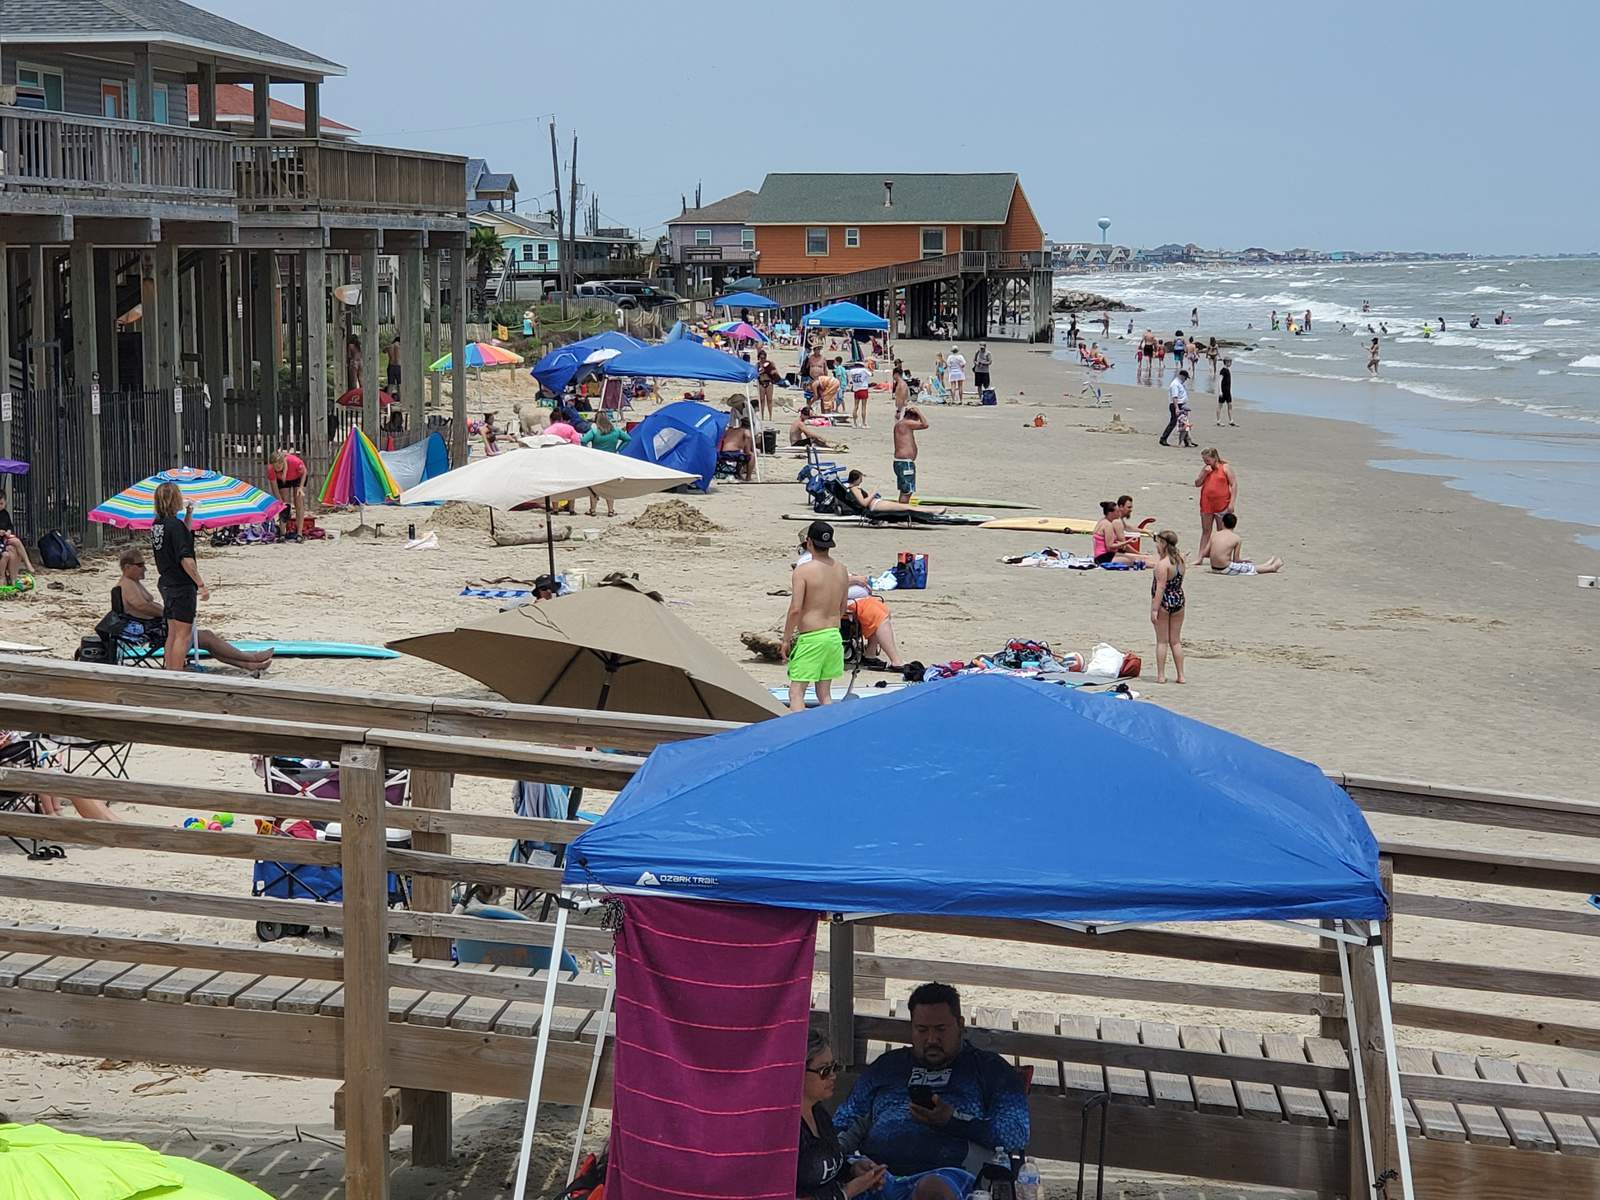 PHOTOS: Hundreds of people visit Surfside Beach, but many didn’t respect social distancing